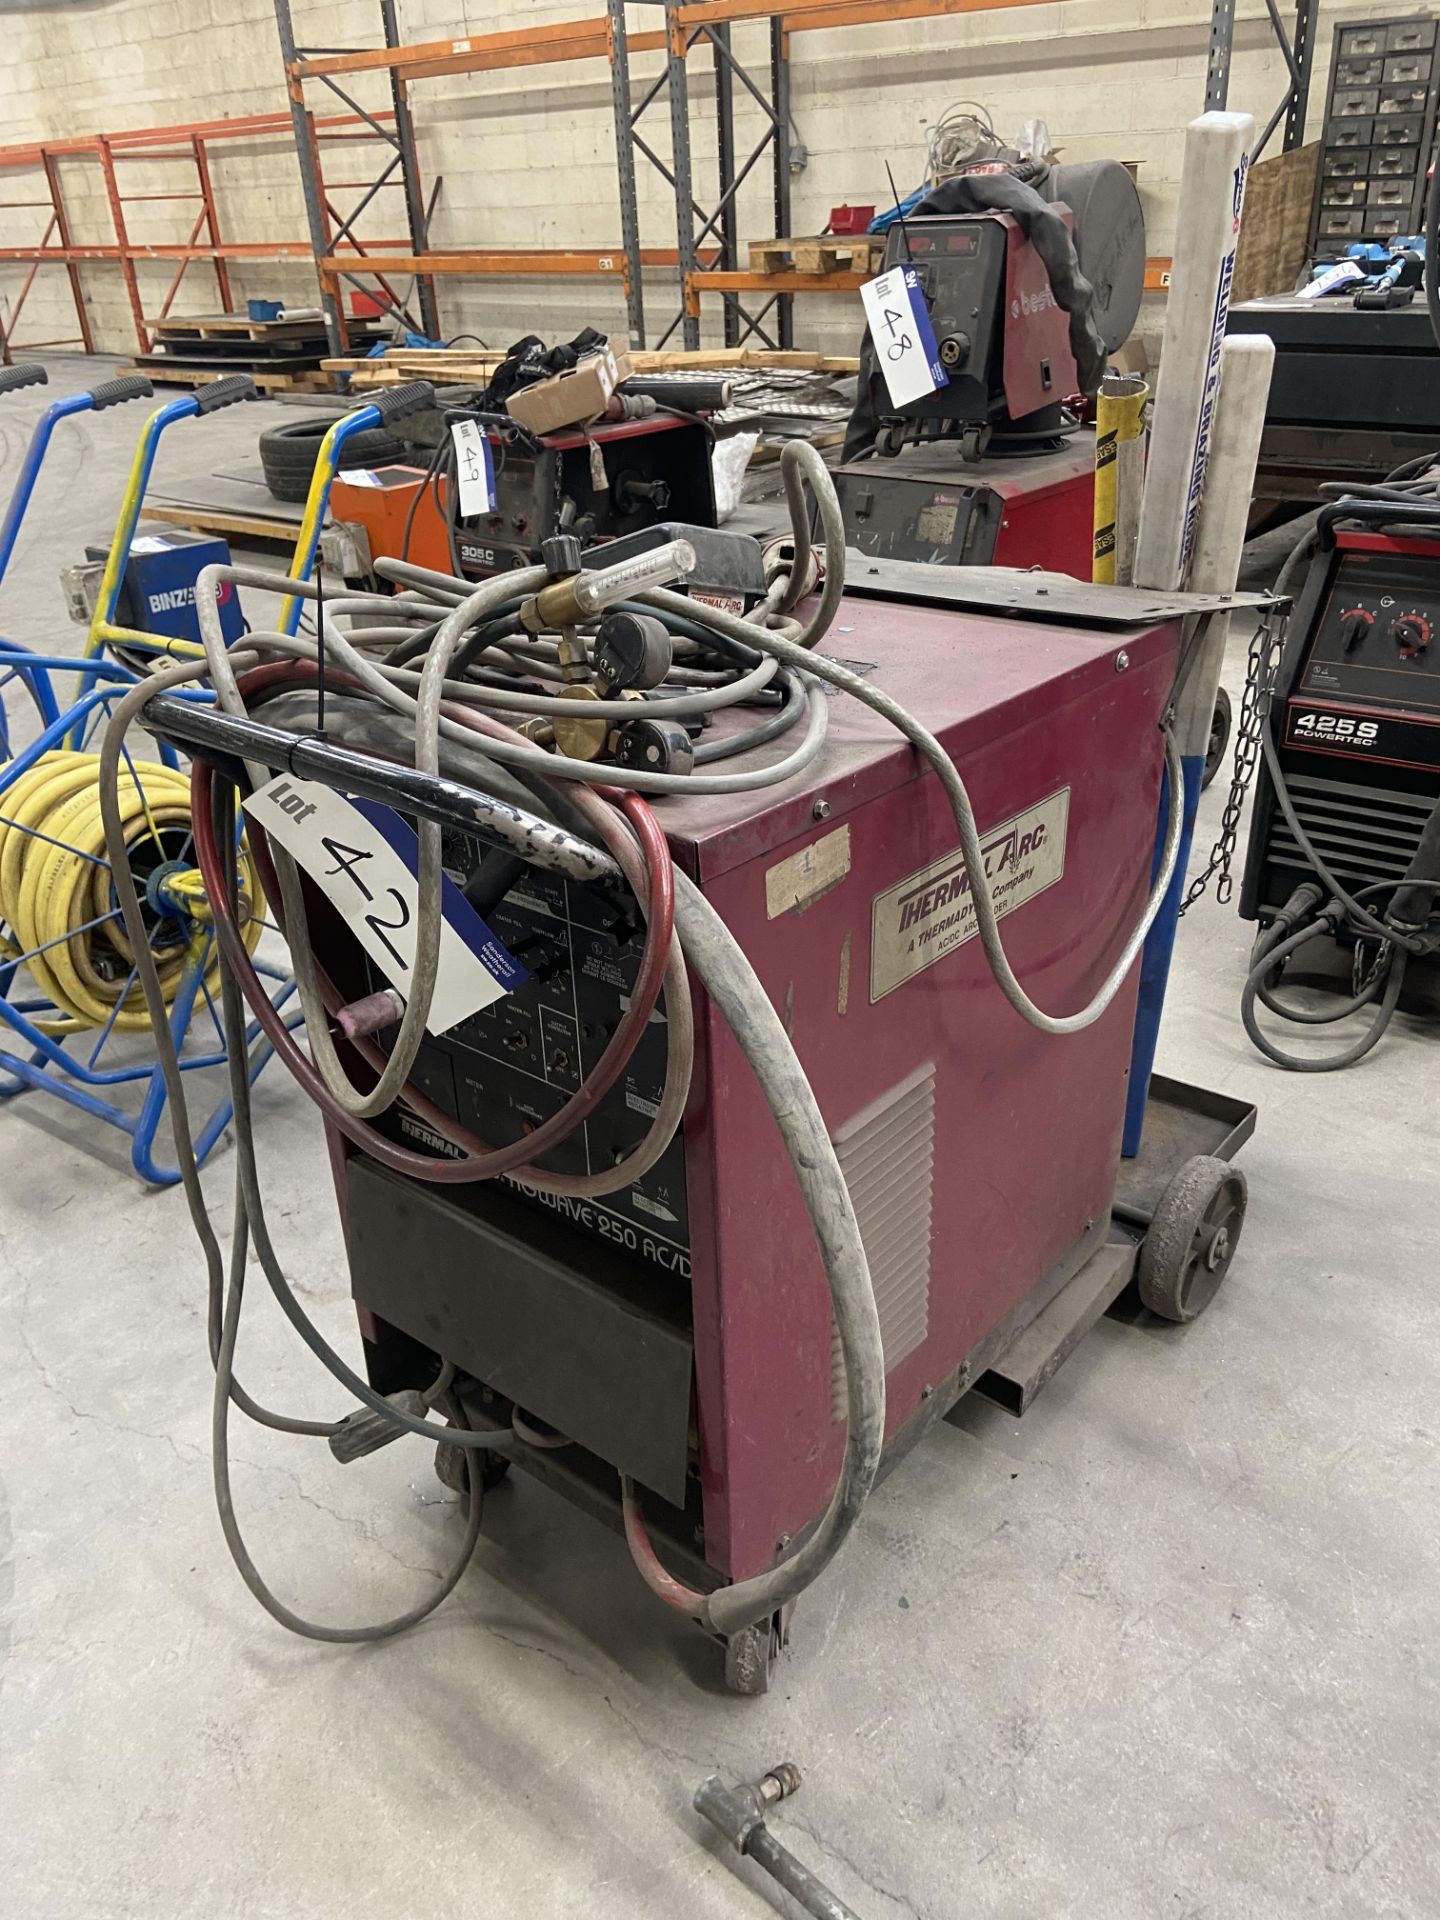 Thermal Arc Tig Wave 250 AC/DC Tig Welding Unit, serial no. 310A/32.4V Please read the following - Image 3 of 5